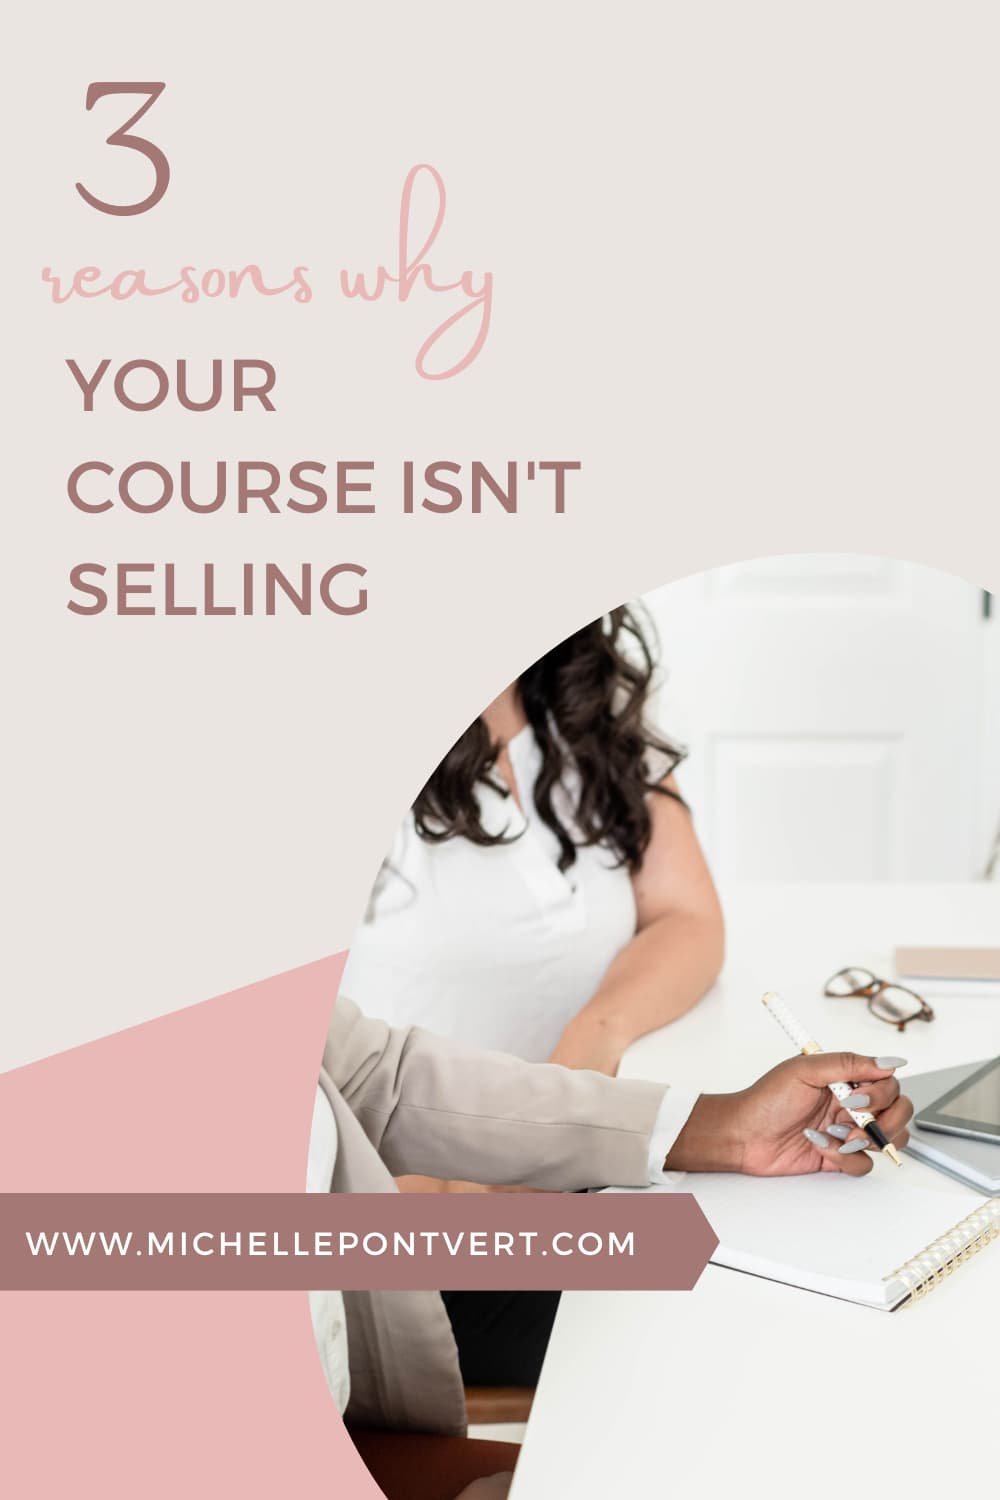 Here's Why Your Online Course Isn't Selling (And What To Do About